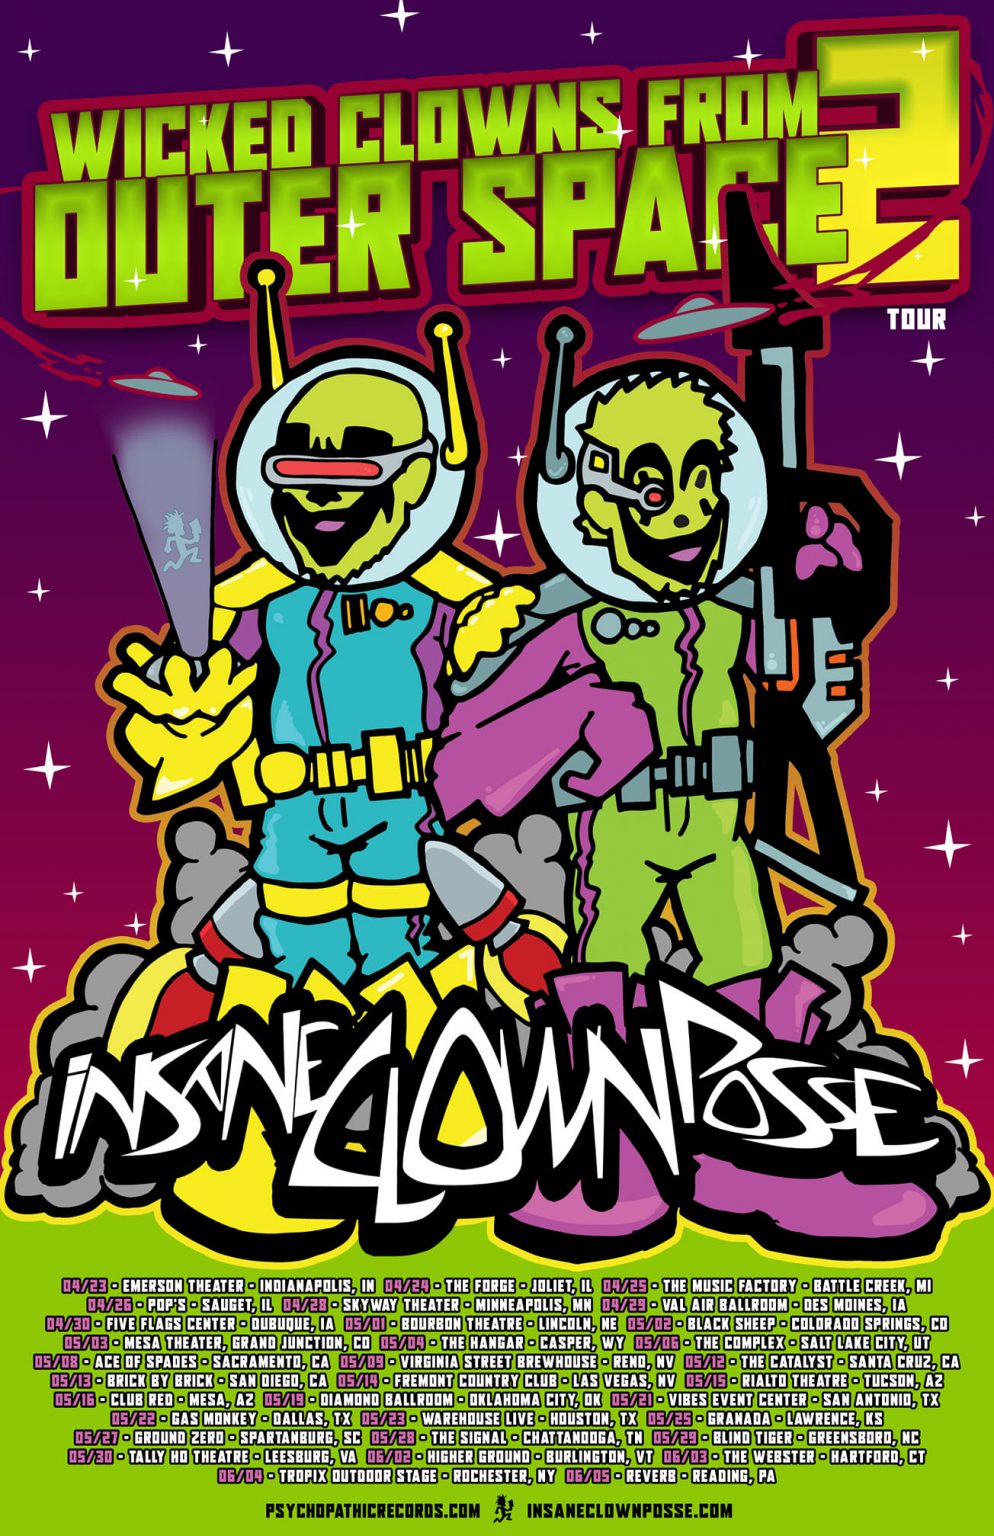 Insane Clown Posse announces the Wicked Clowns from Outer Space Tour